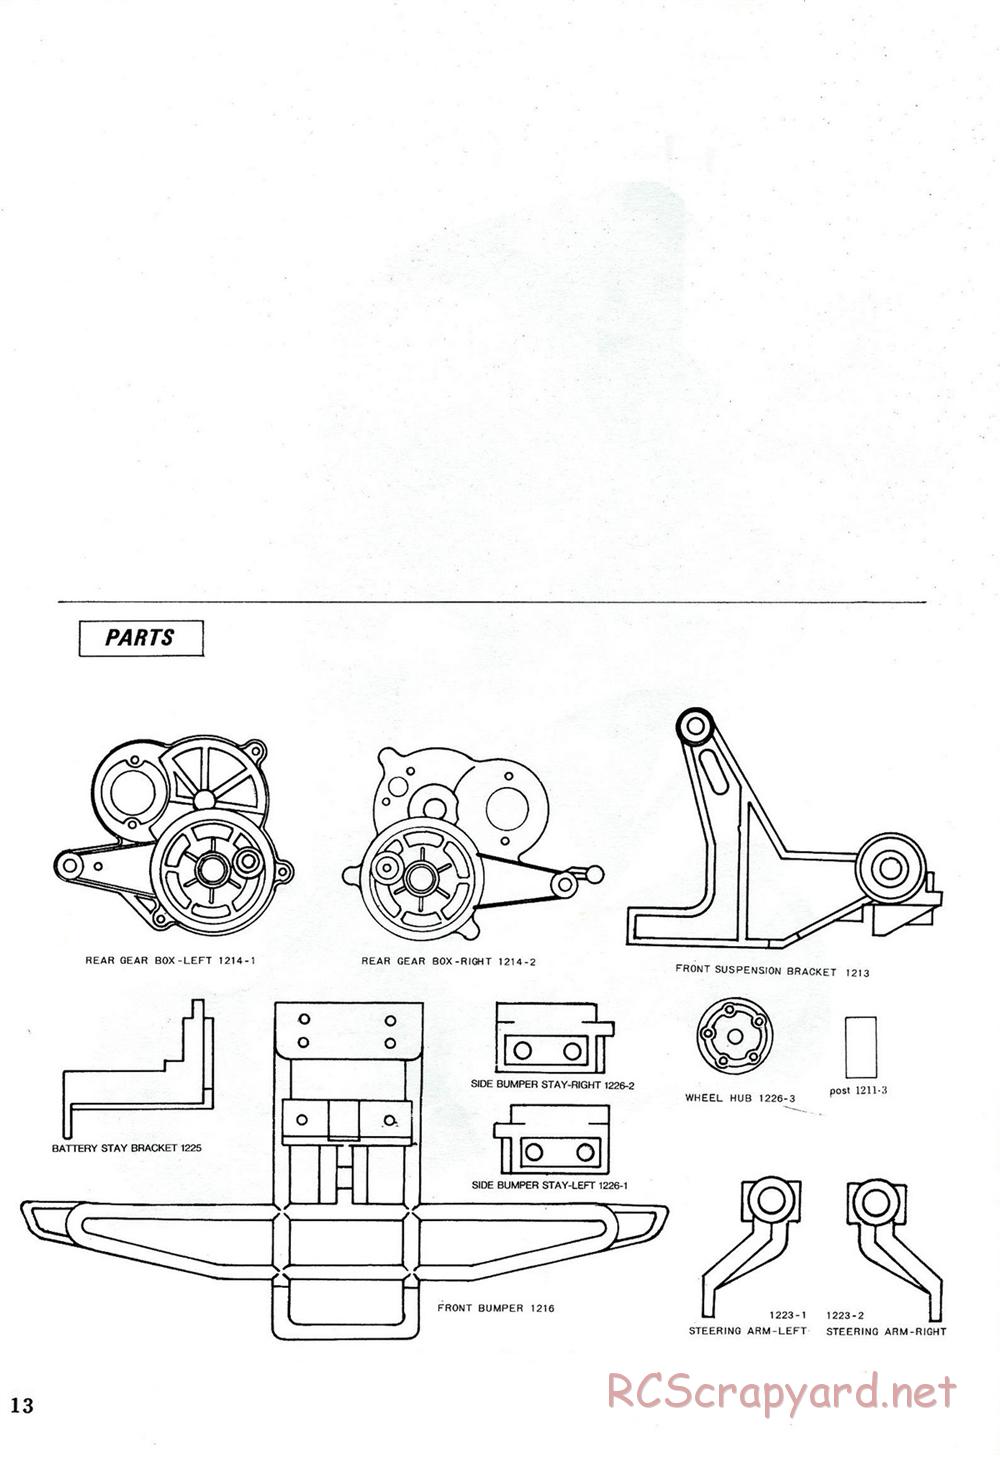 Traxxas - The Cat (1987) - Manual - Page 11